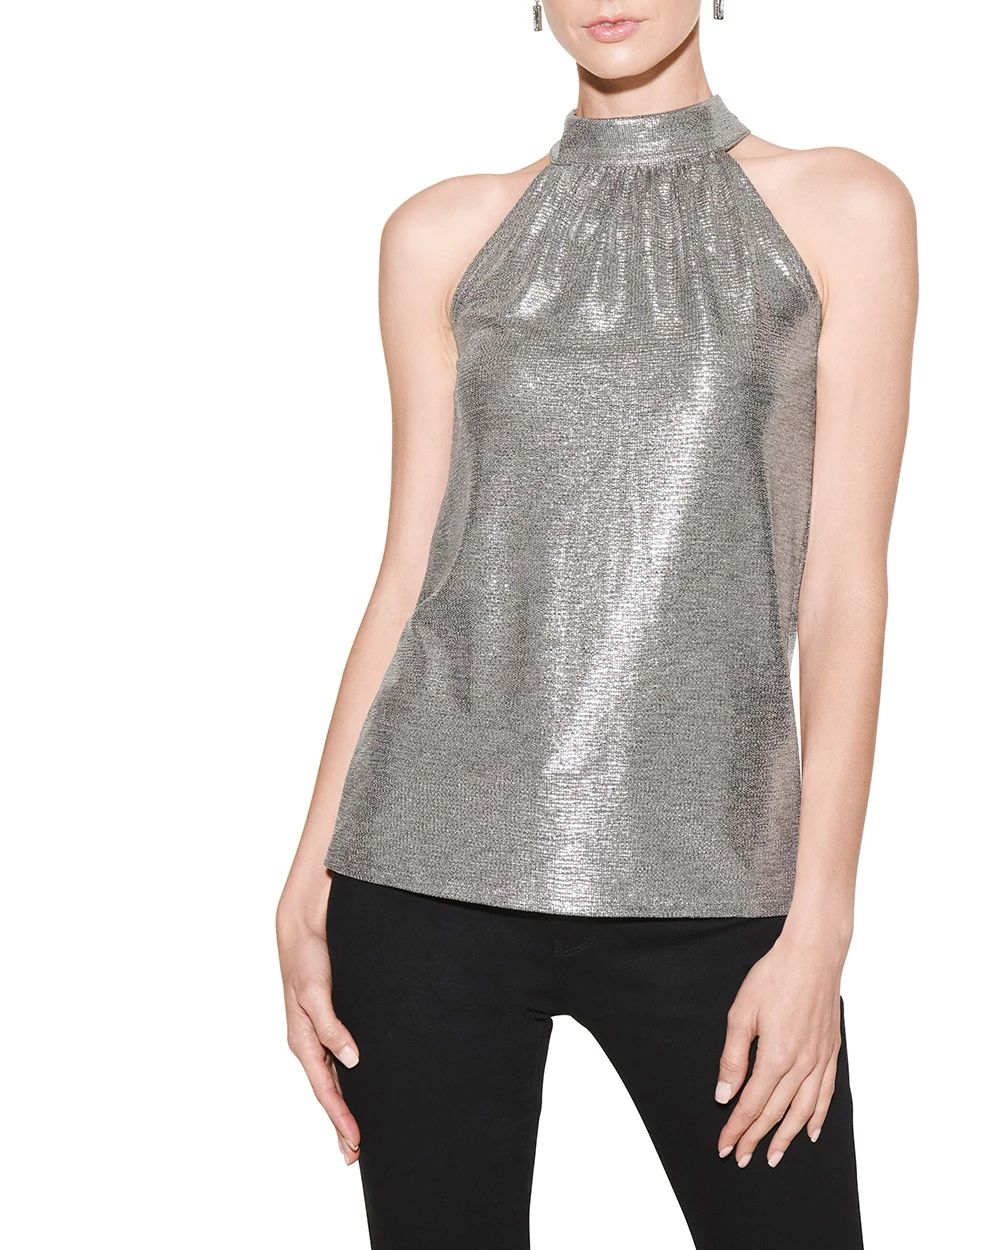 Outlet WHBM Dramatic Shine Halter Top